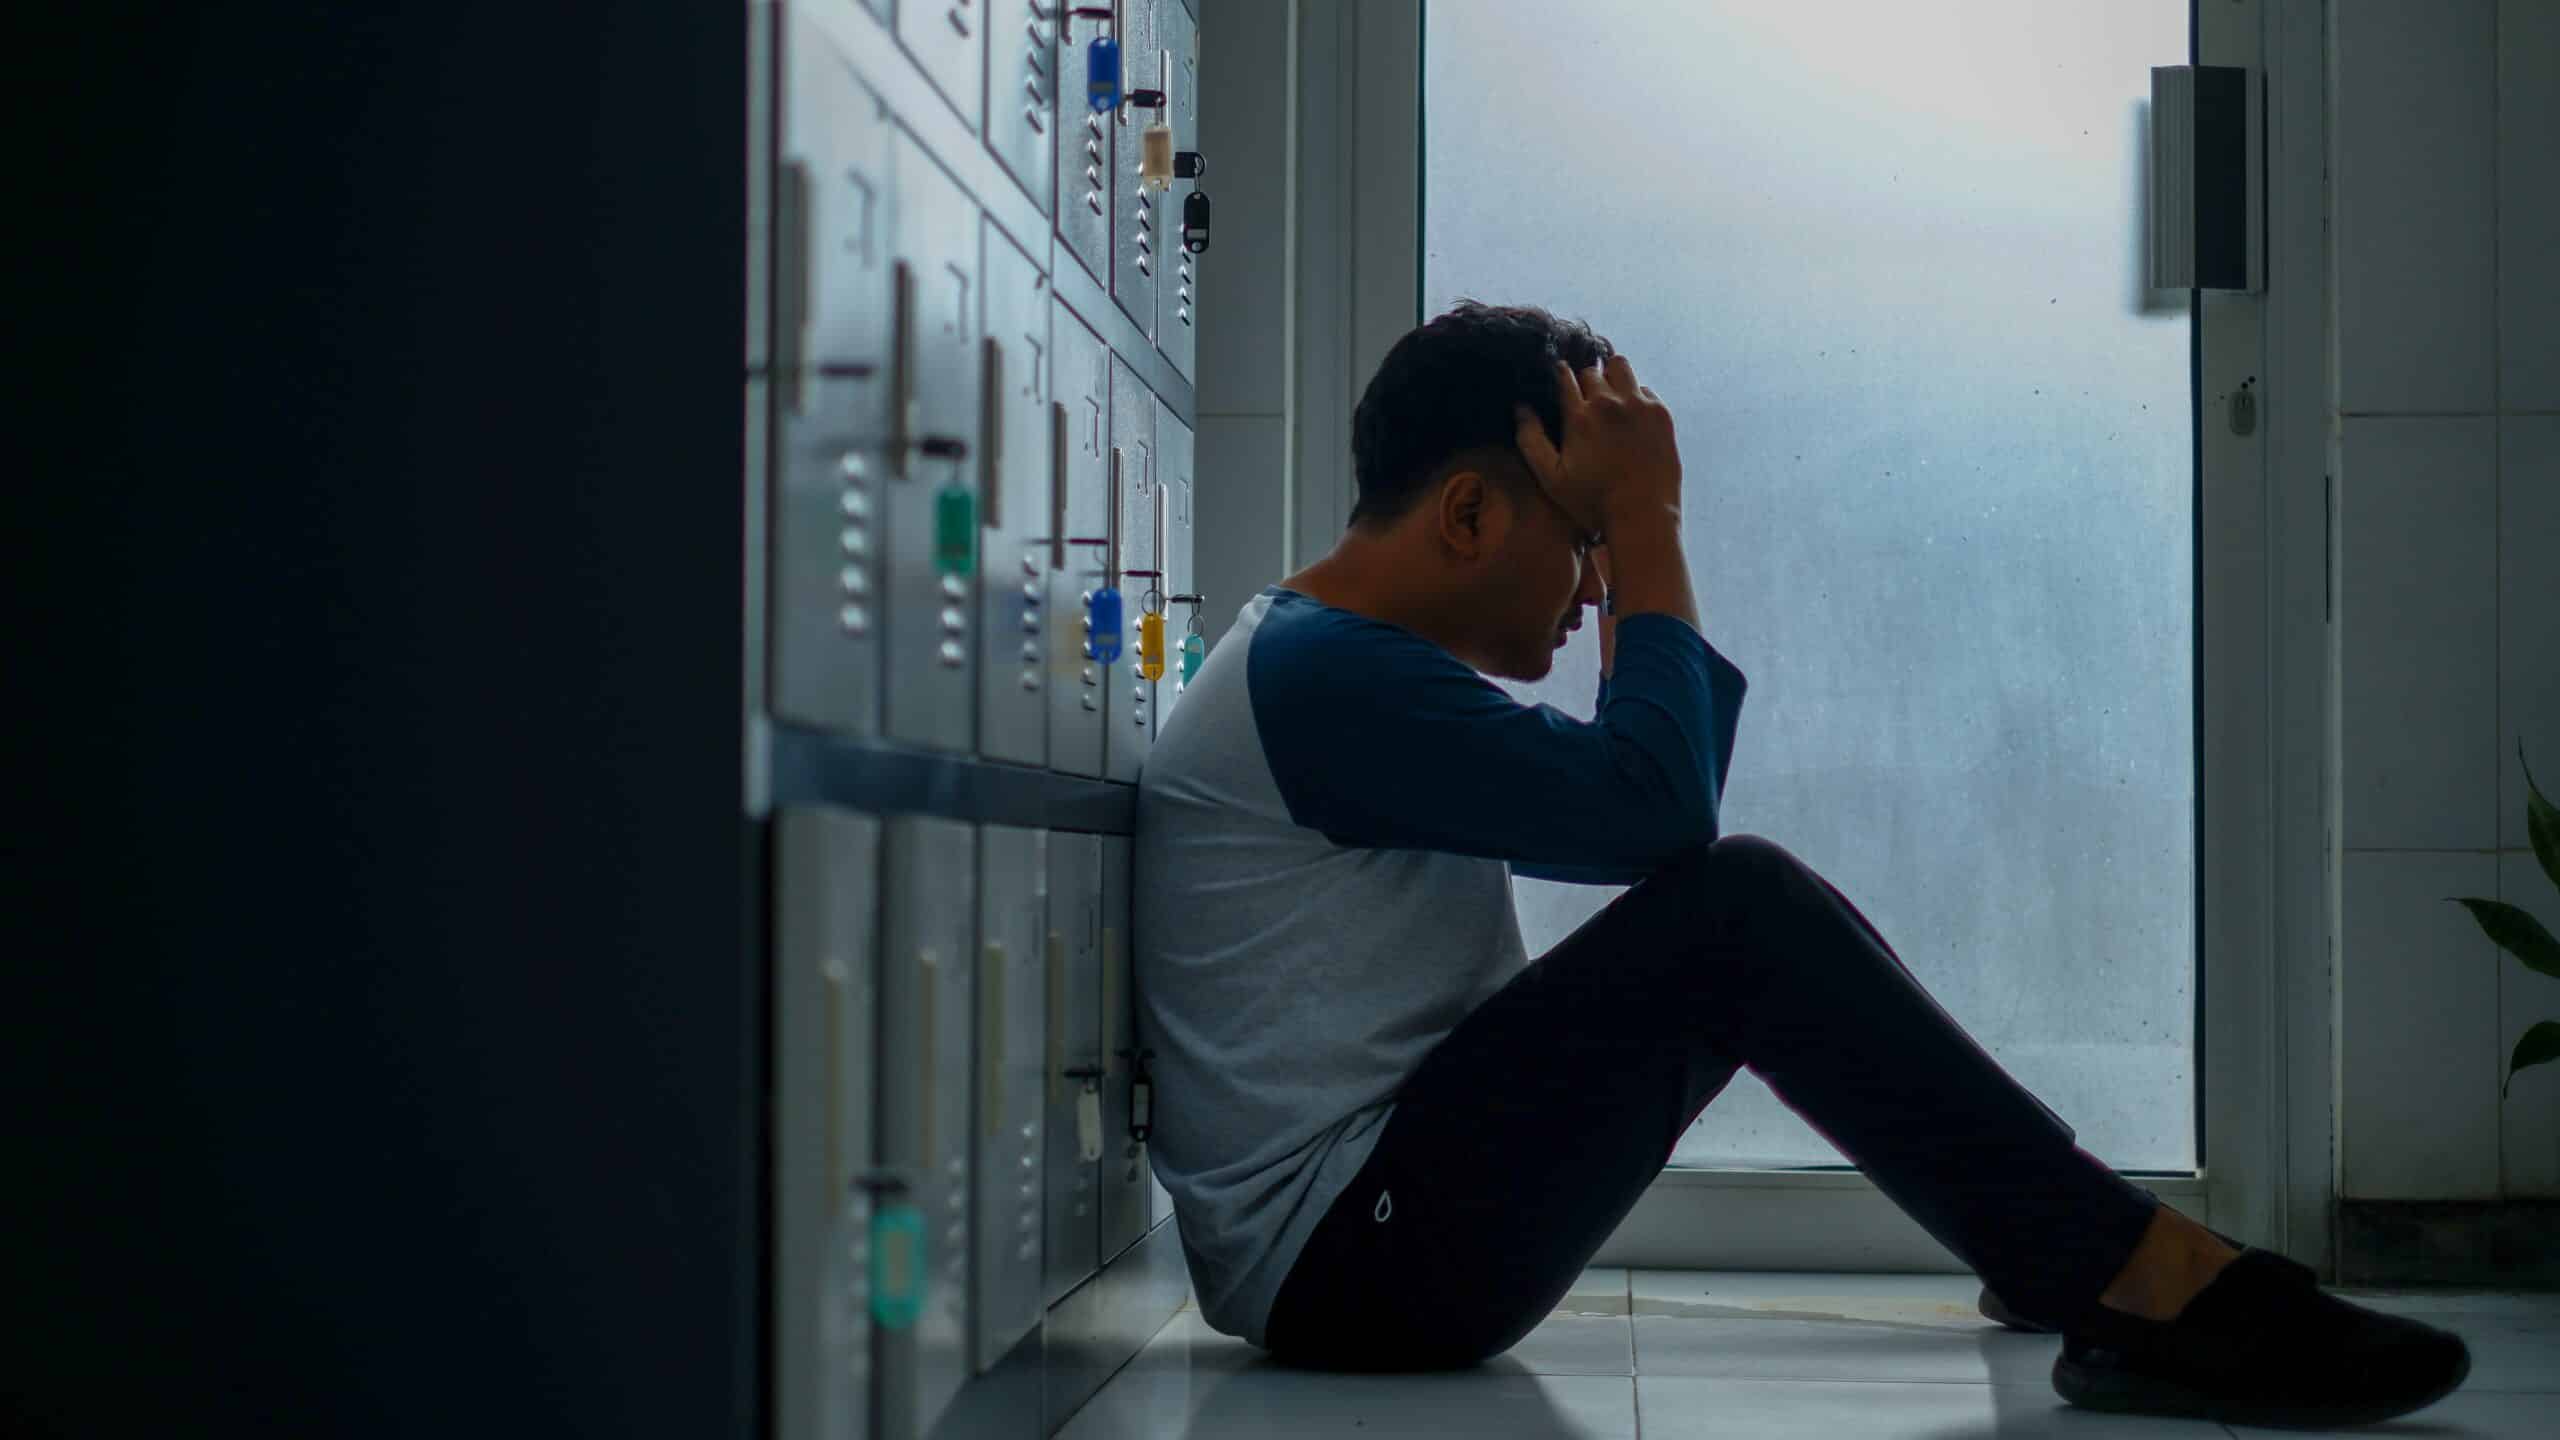 A man sitting against a row of lockers with his head in his hands, representing teachers and stress during the COVID-19 pandemic in Ontario